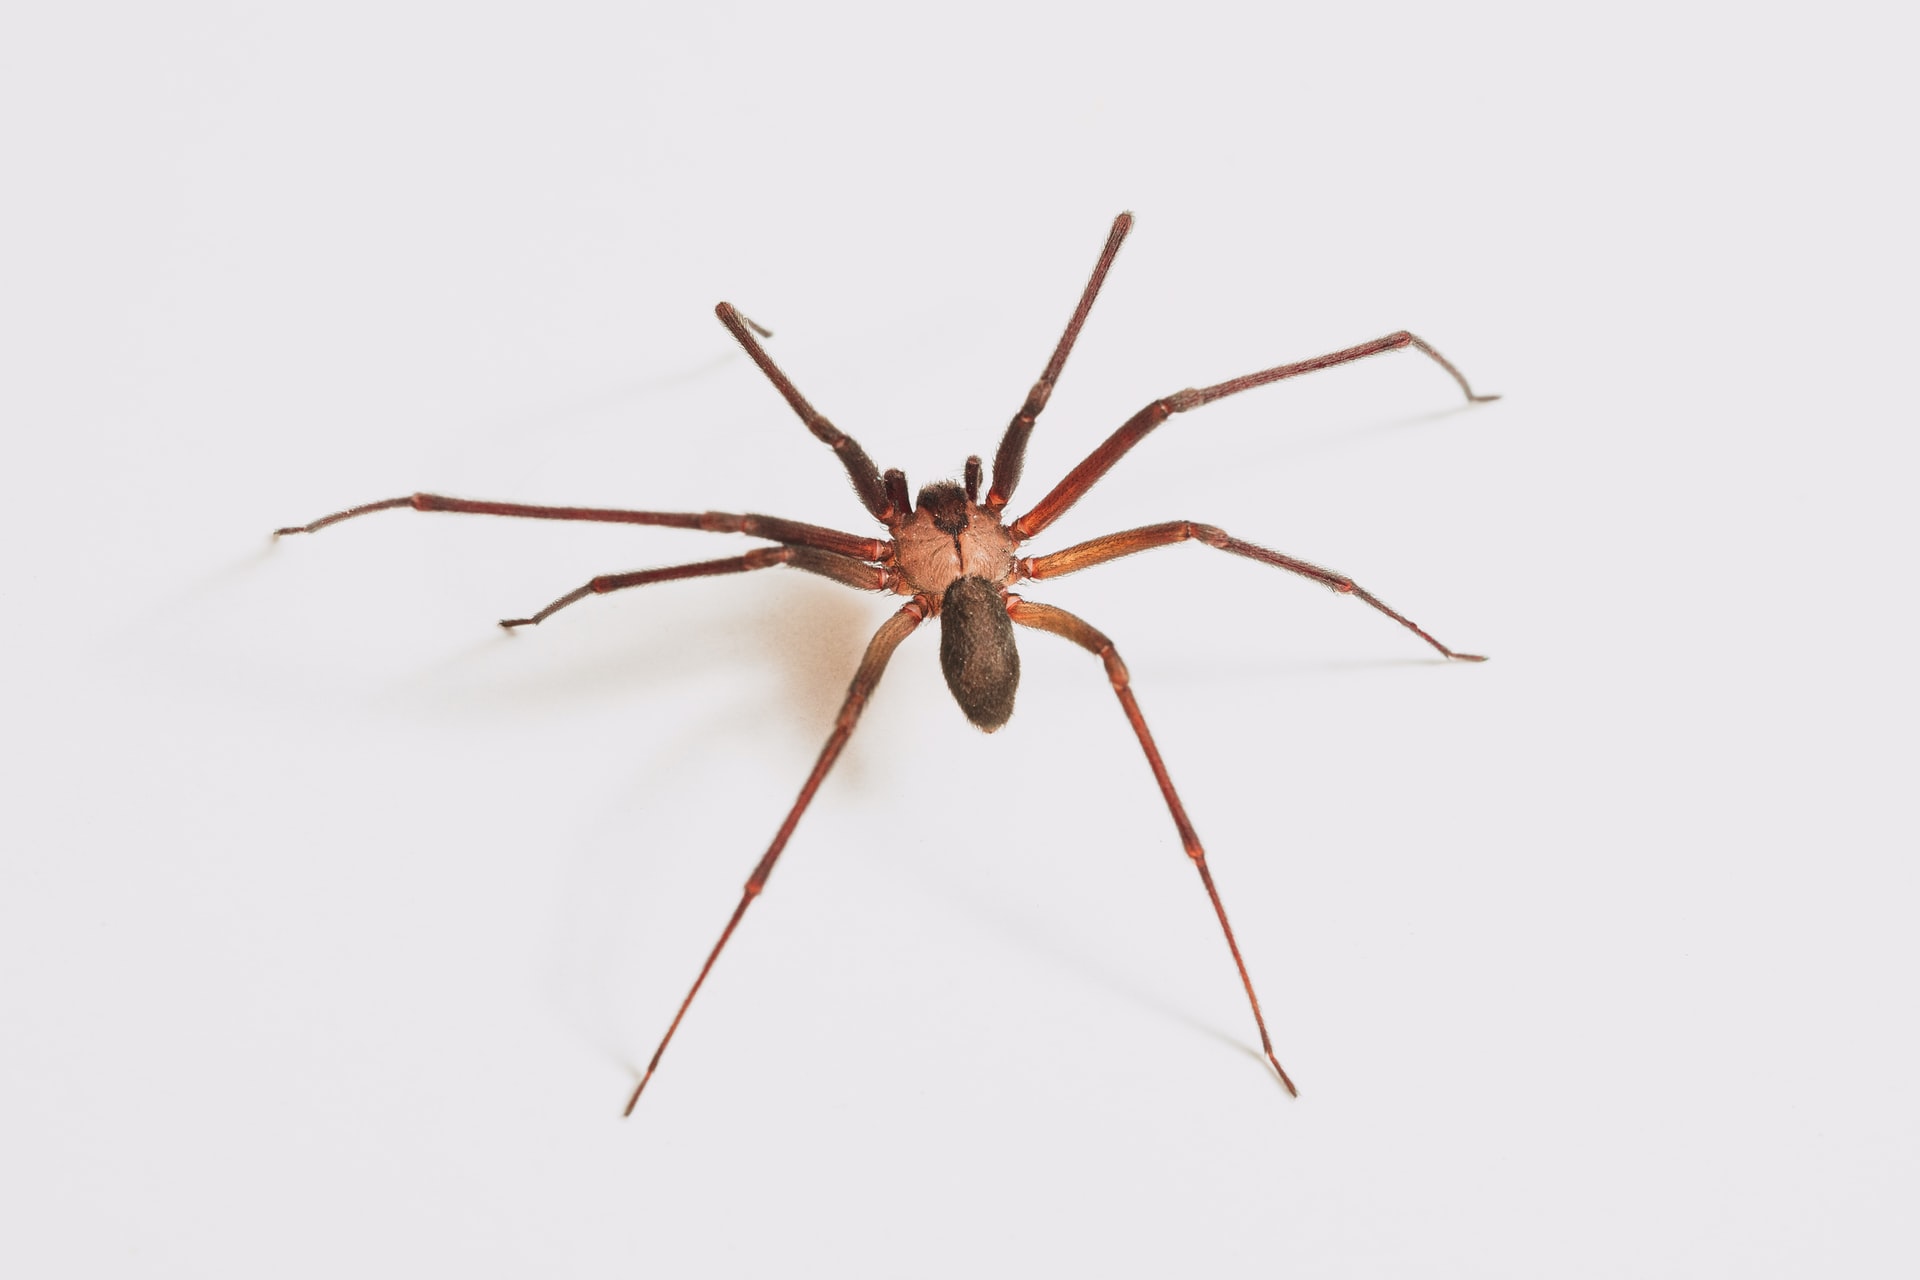 Brown Recluse Spider Bites on Dogs: Recognizing Signs & More